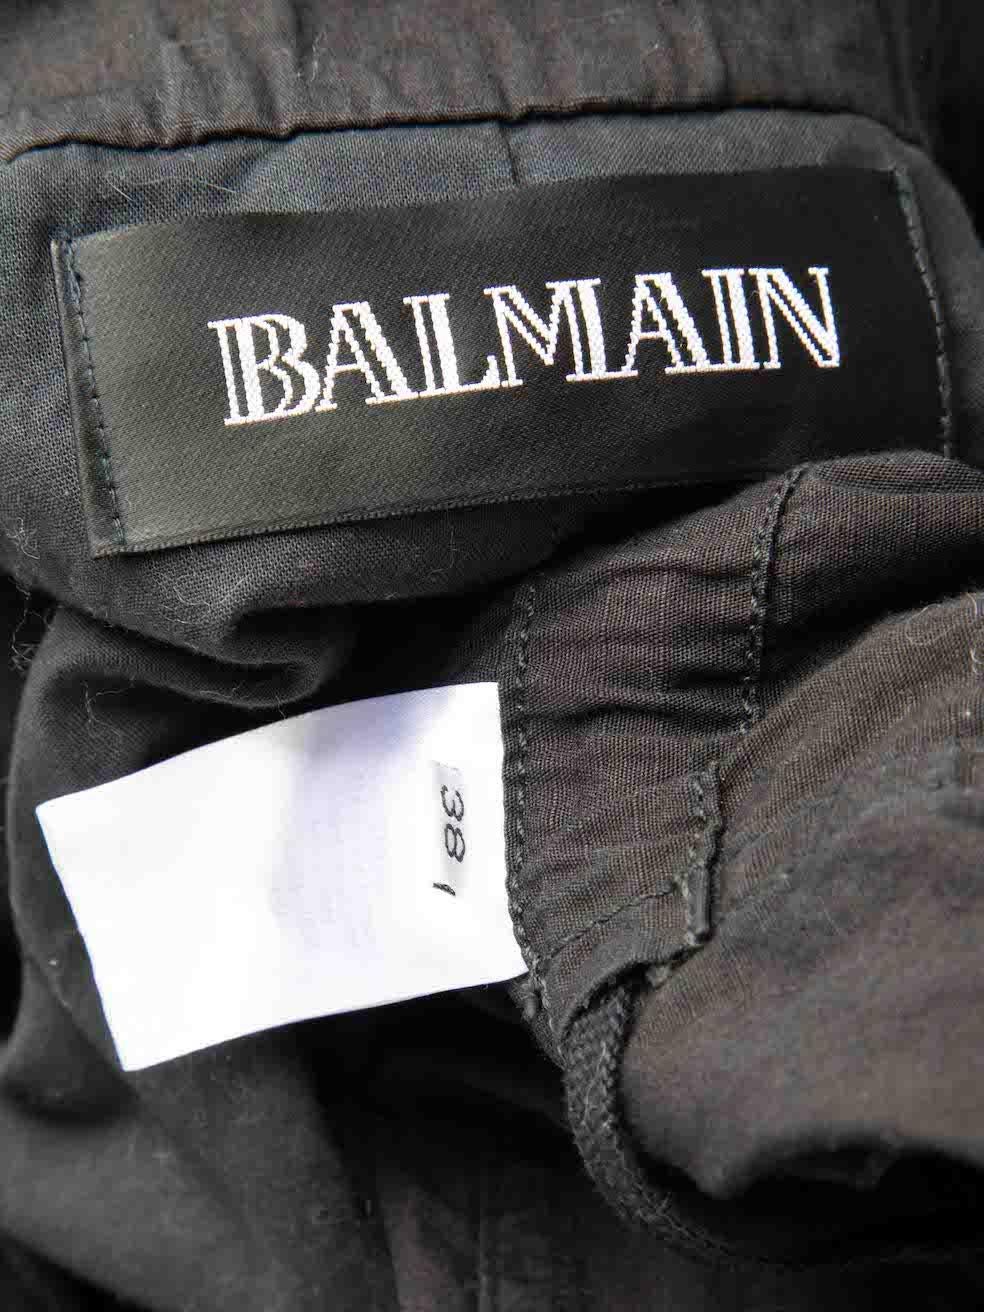 Balmain Black Embroidered Patch Parka Jacket Size M For Sale 3